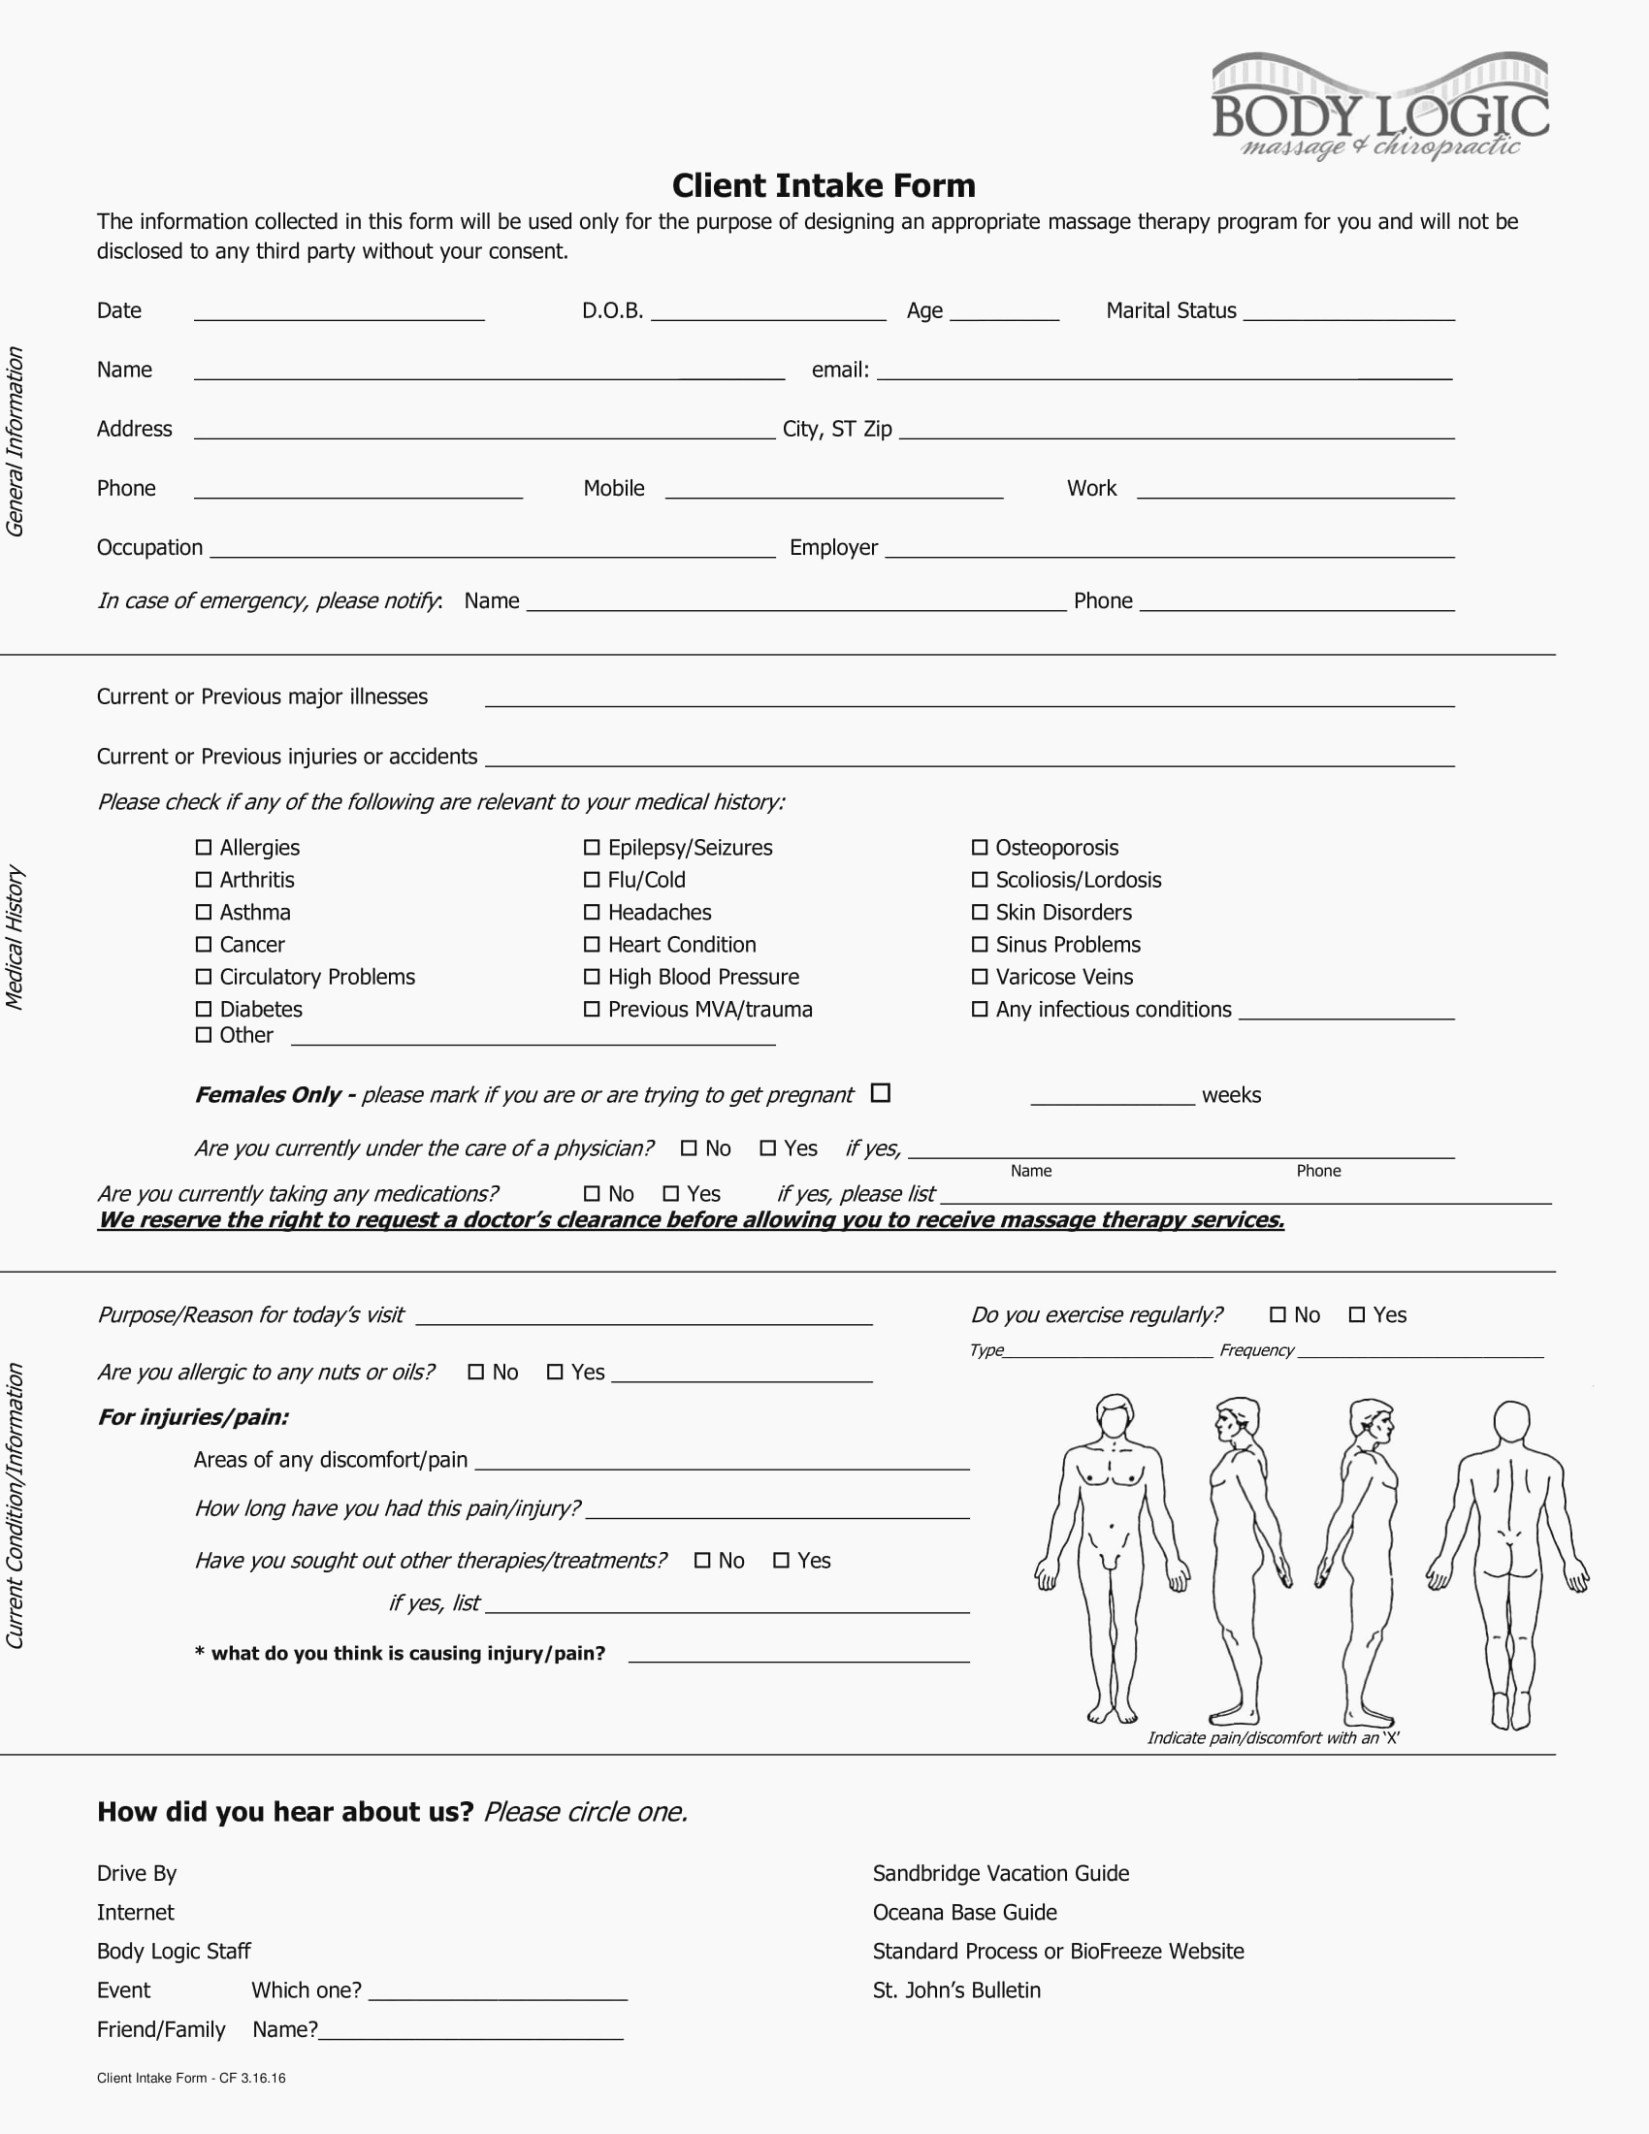 Massage therapy Intake form Template Fresh Five top Risks